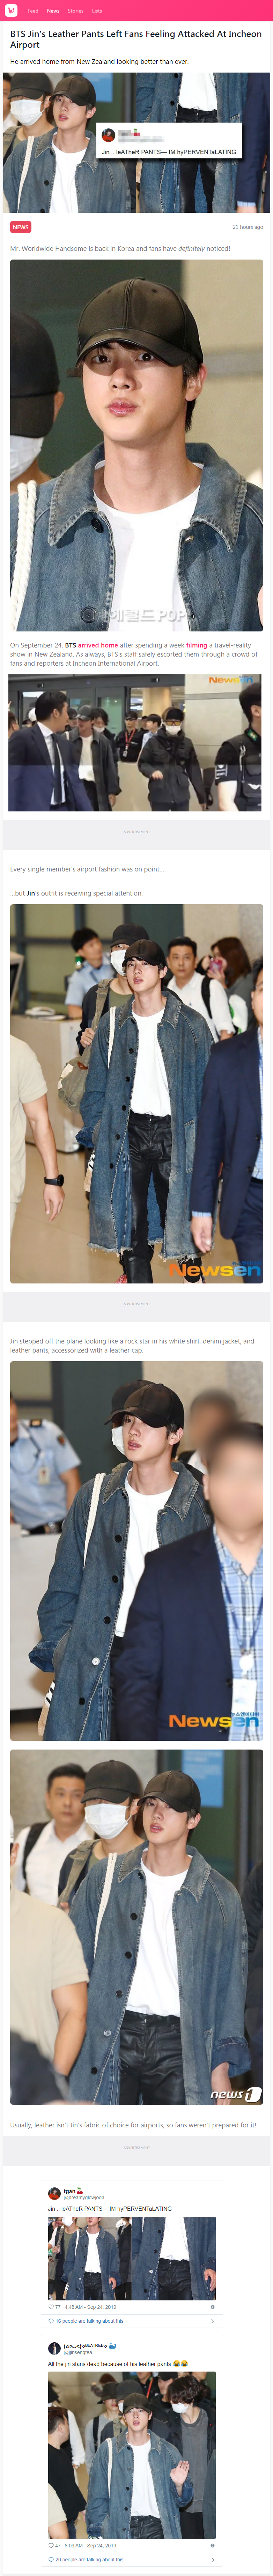 BTS Jin's Leather Pants Left Fans Feeling Attacked At Incheon Airport